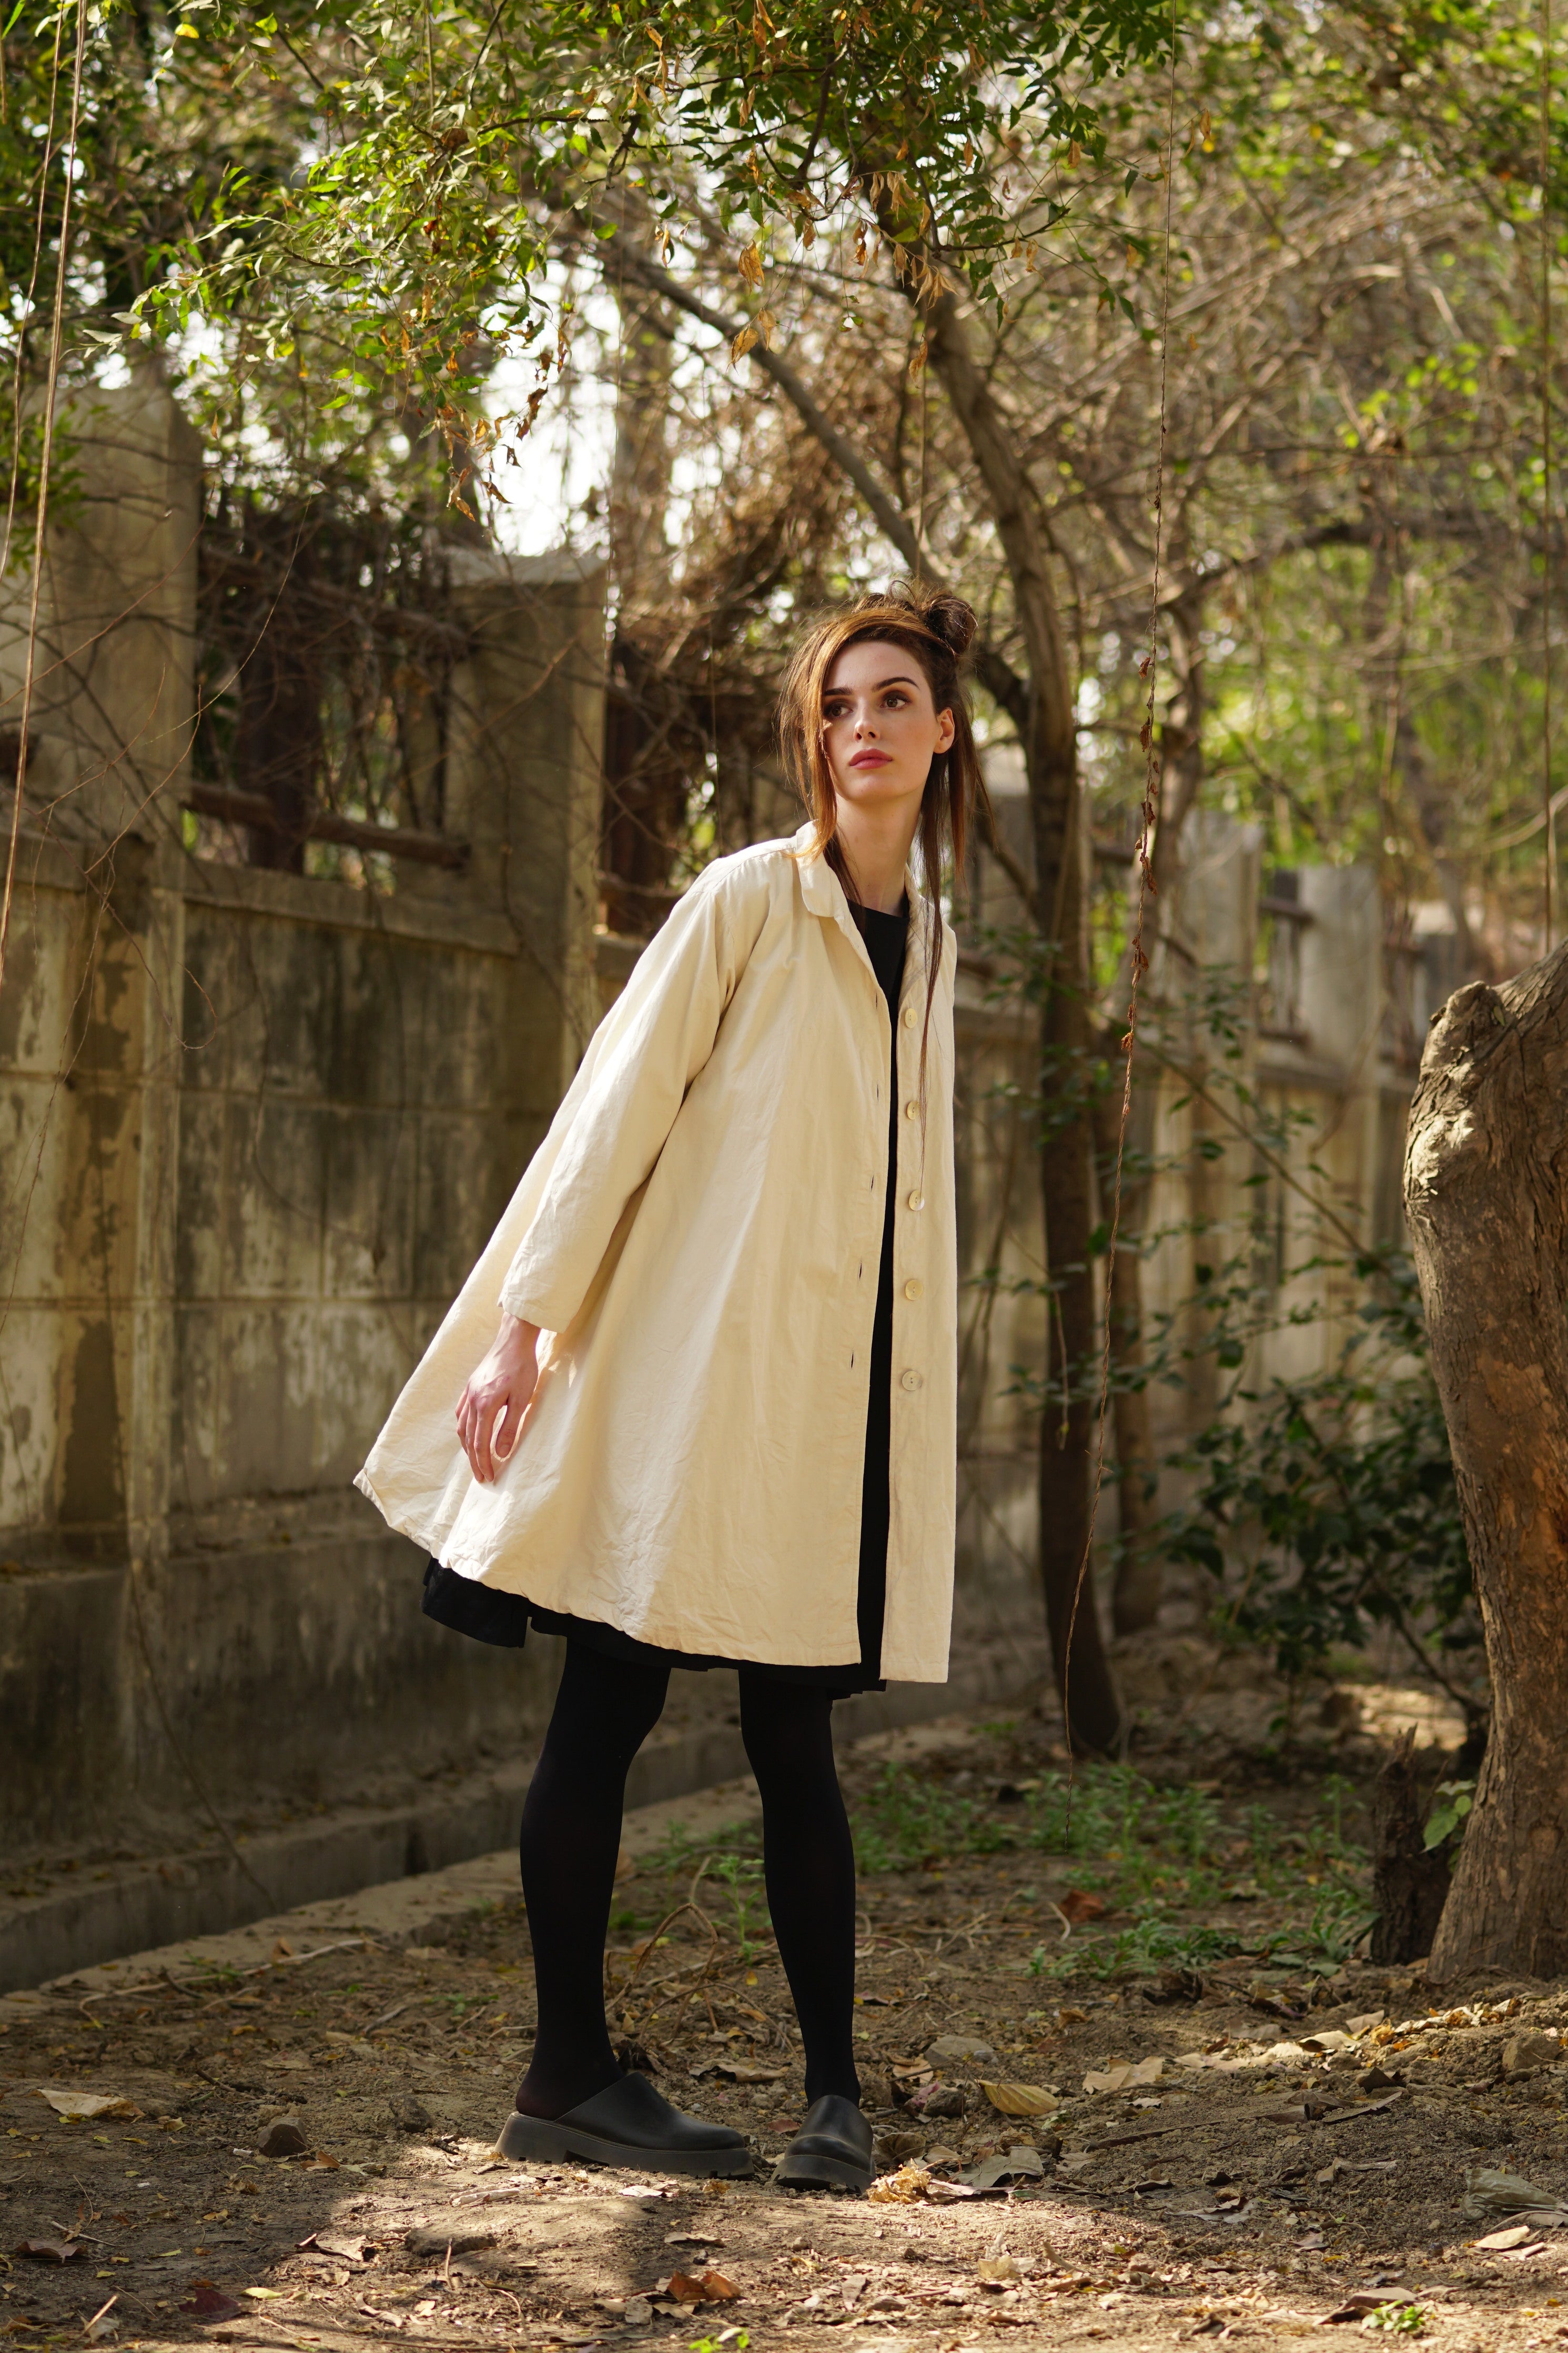 A MegbyDesign model is wearing a lined cotton twill cream coat with large black spots featuring agoya shell buttons, side pockets and a classic cut collar